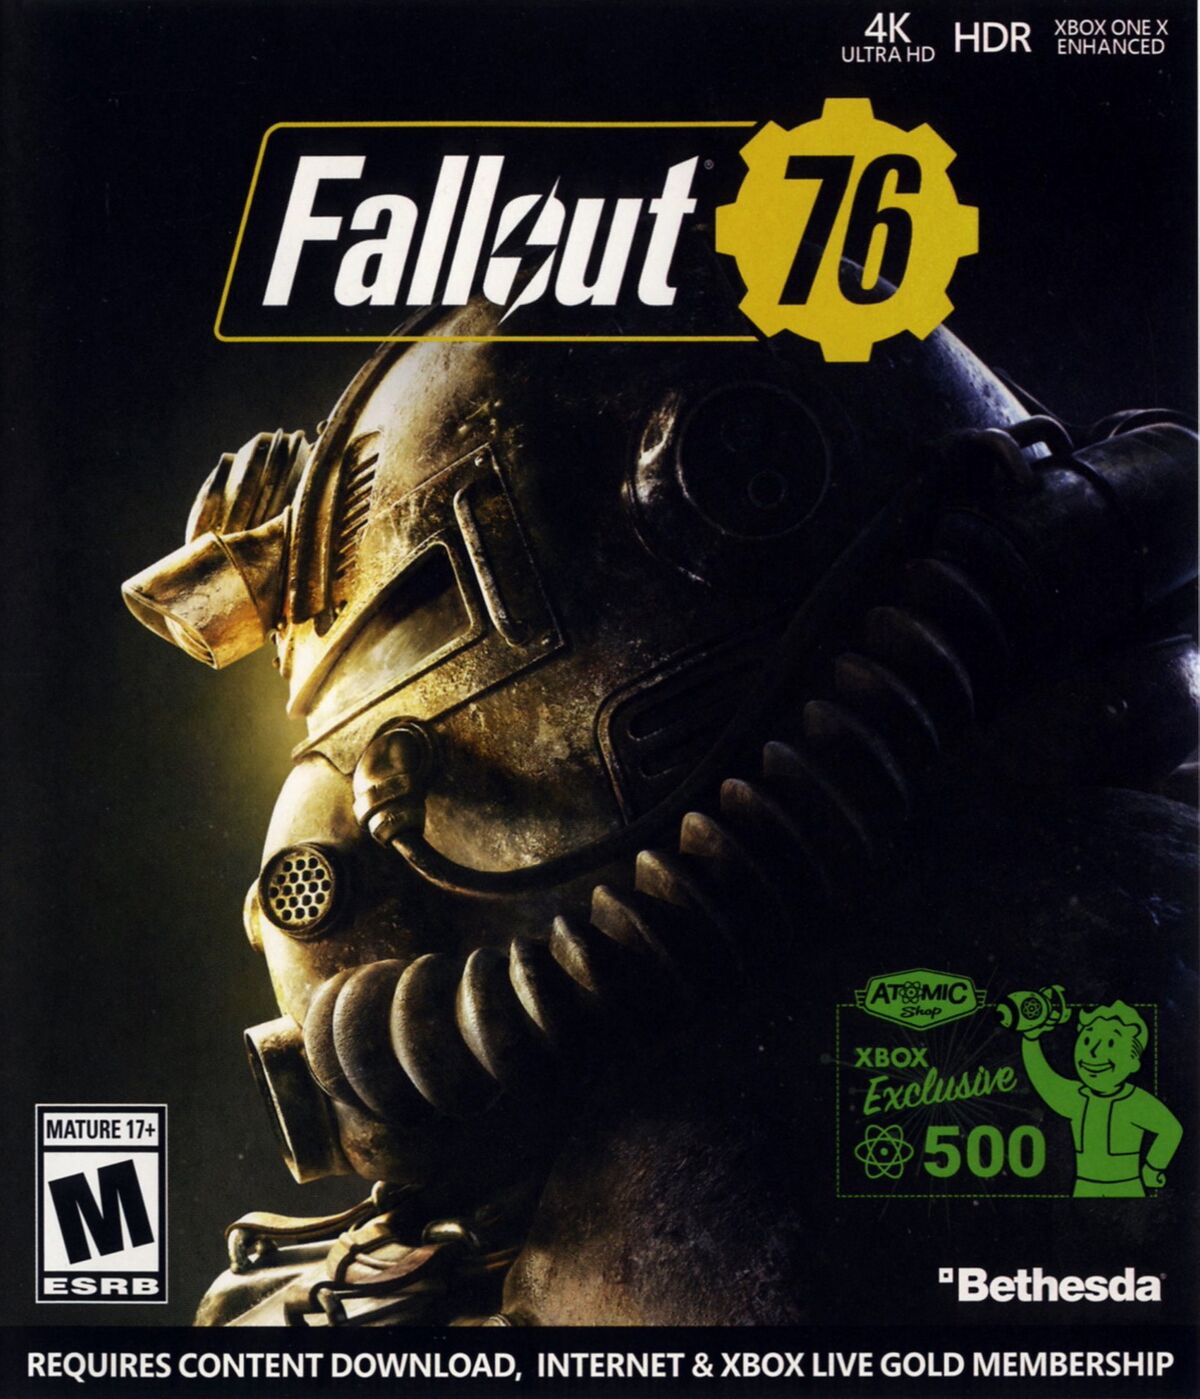 Fallout: New Vegas — StrategyWiki  Strategy guide and game reference wiki